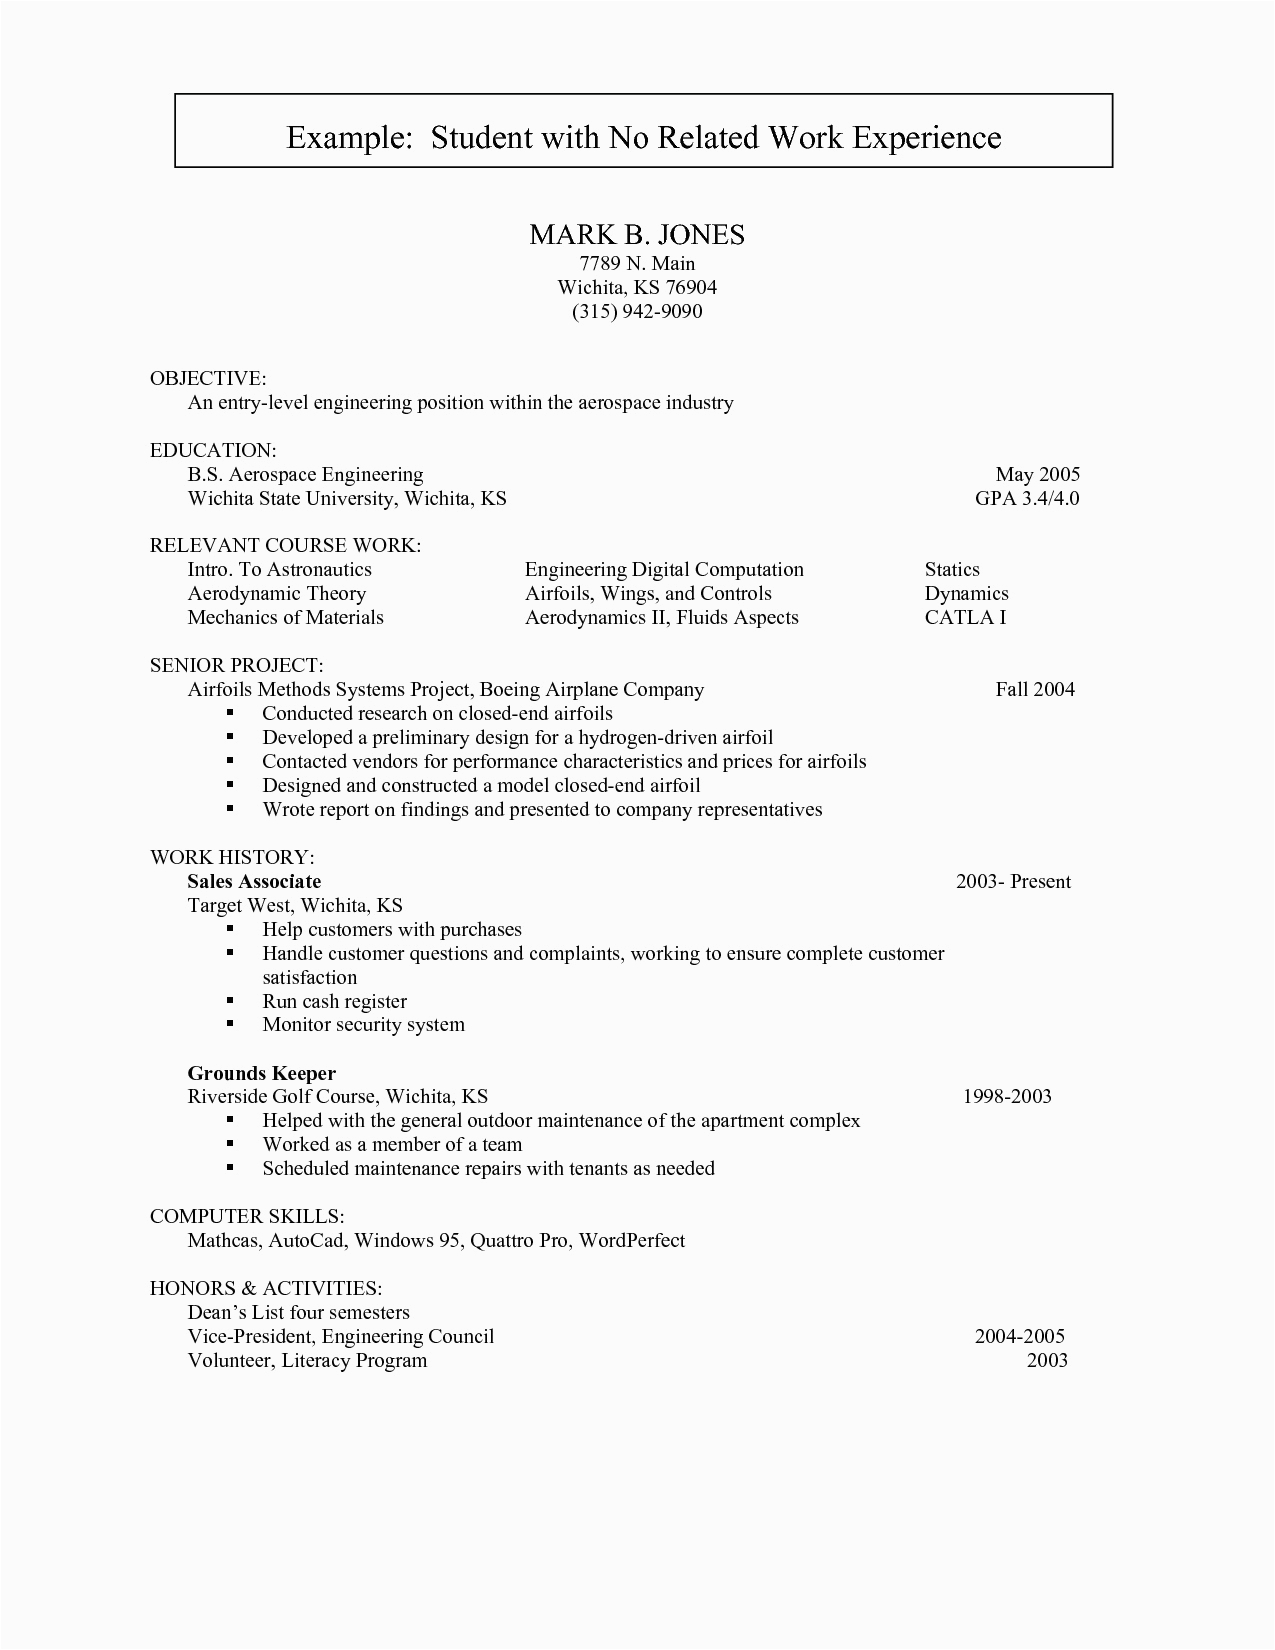 Sample Of Functional Resume with No Experience Resume with No Work Experience Samples